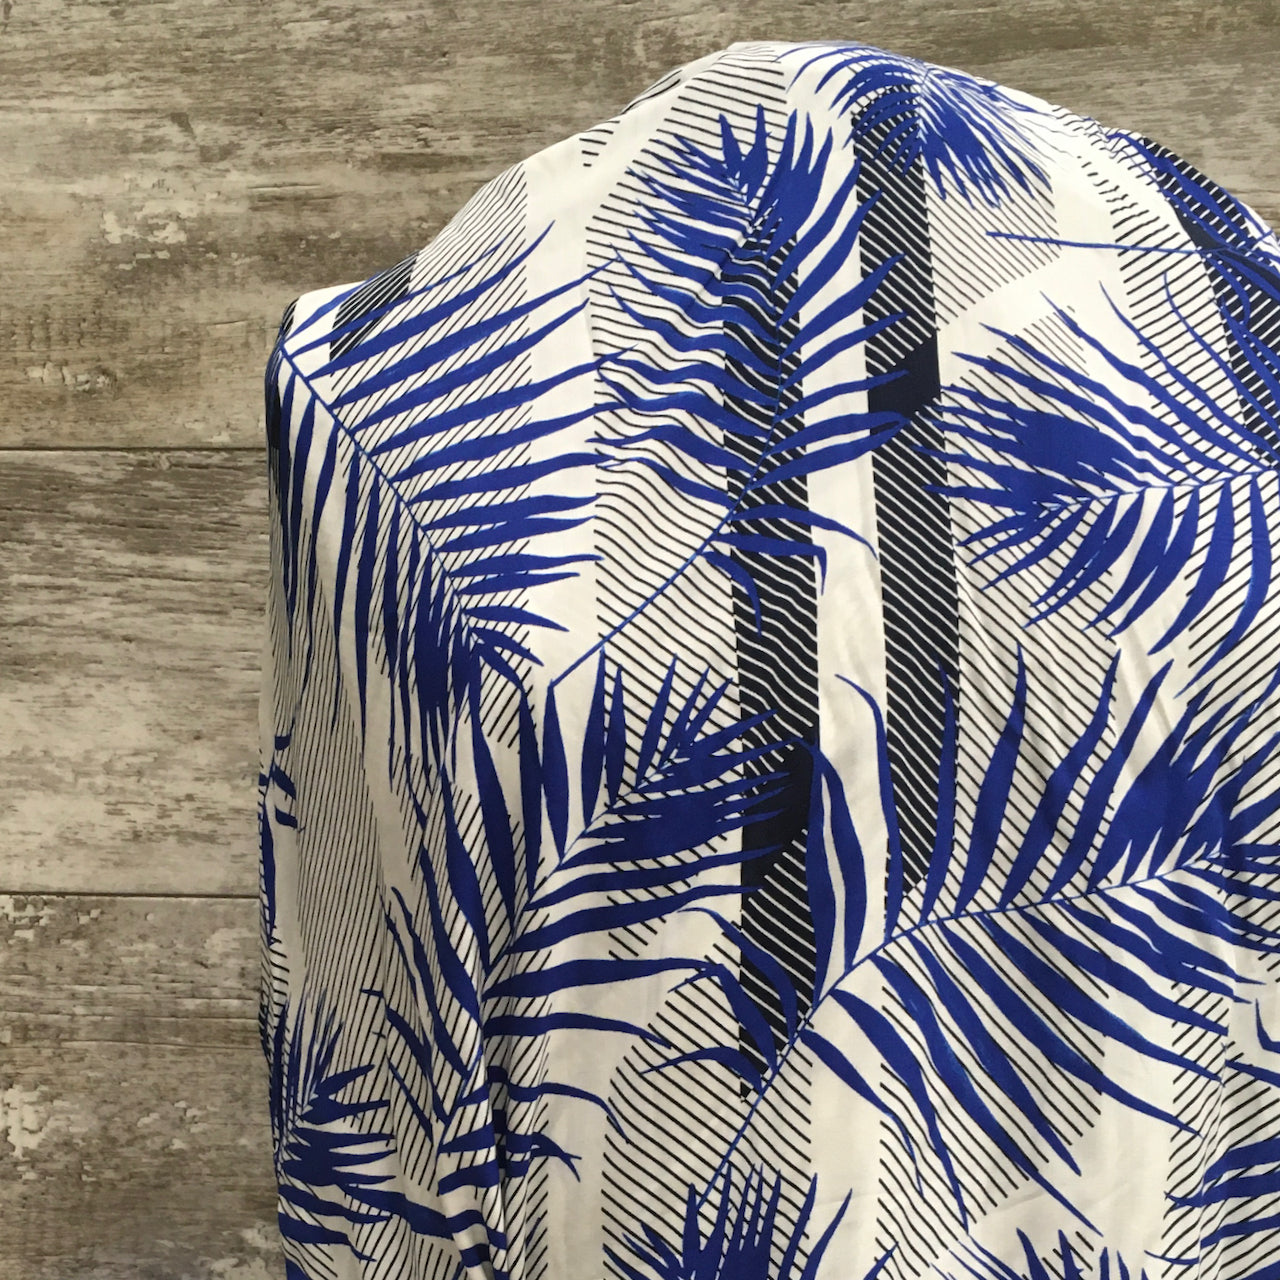 Viscose / Woven Palm Sunday Blue - Sold by the half yard